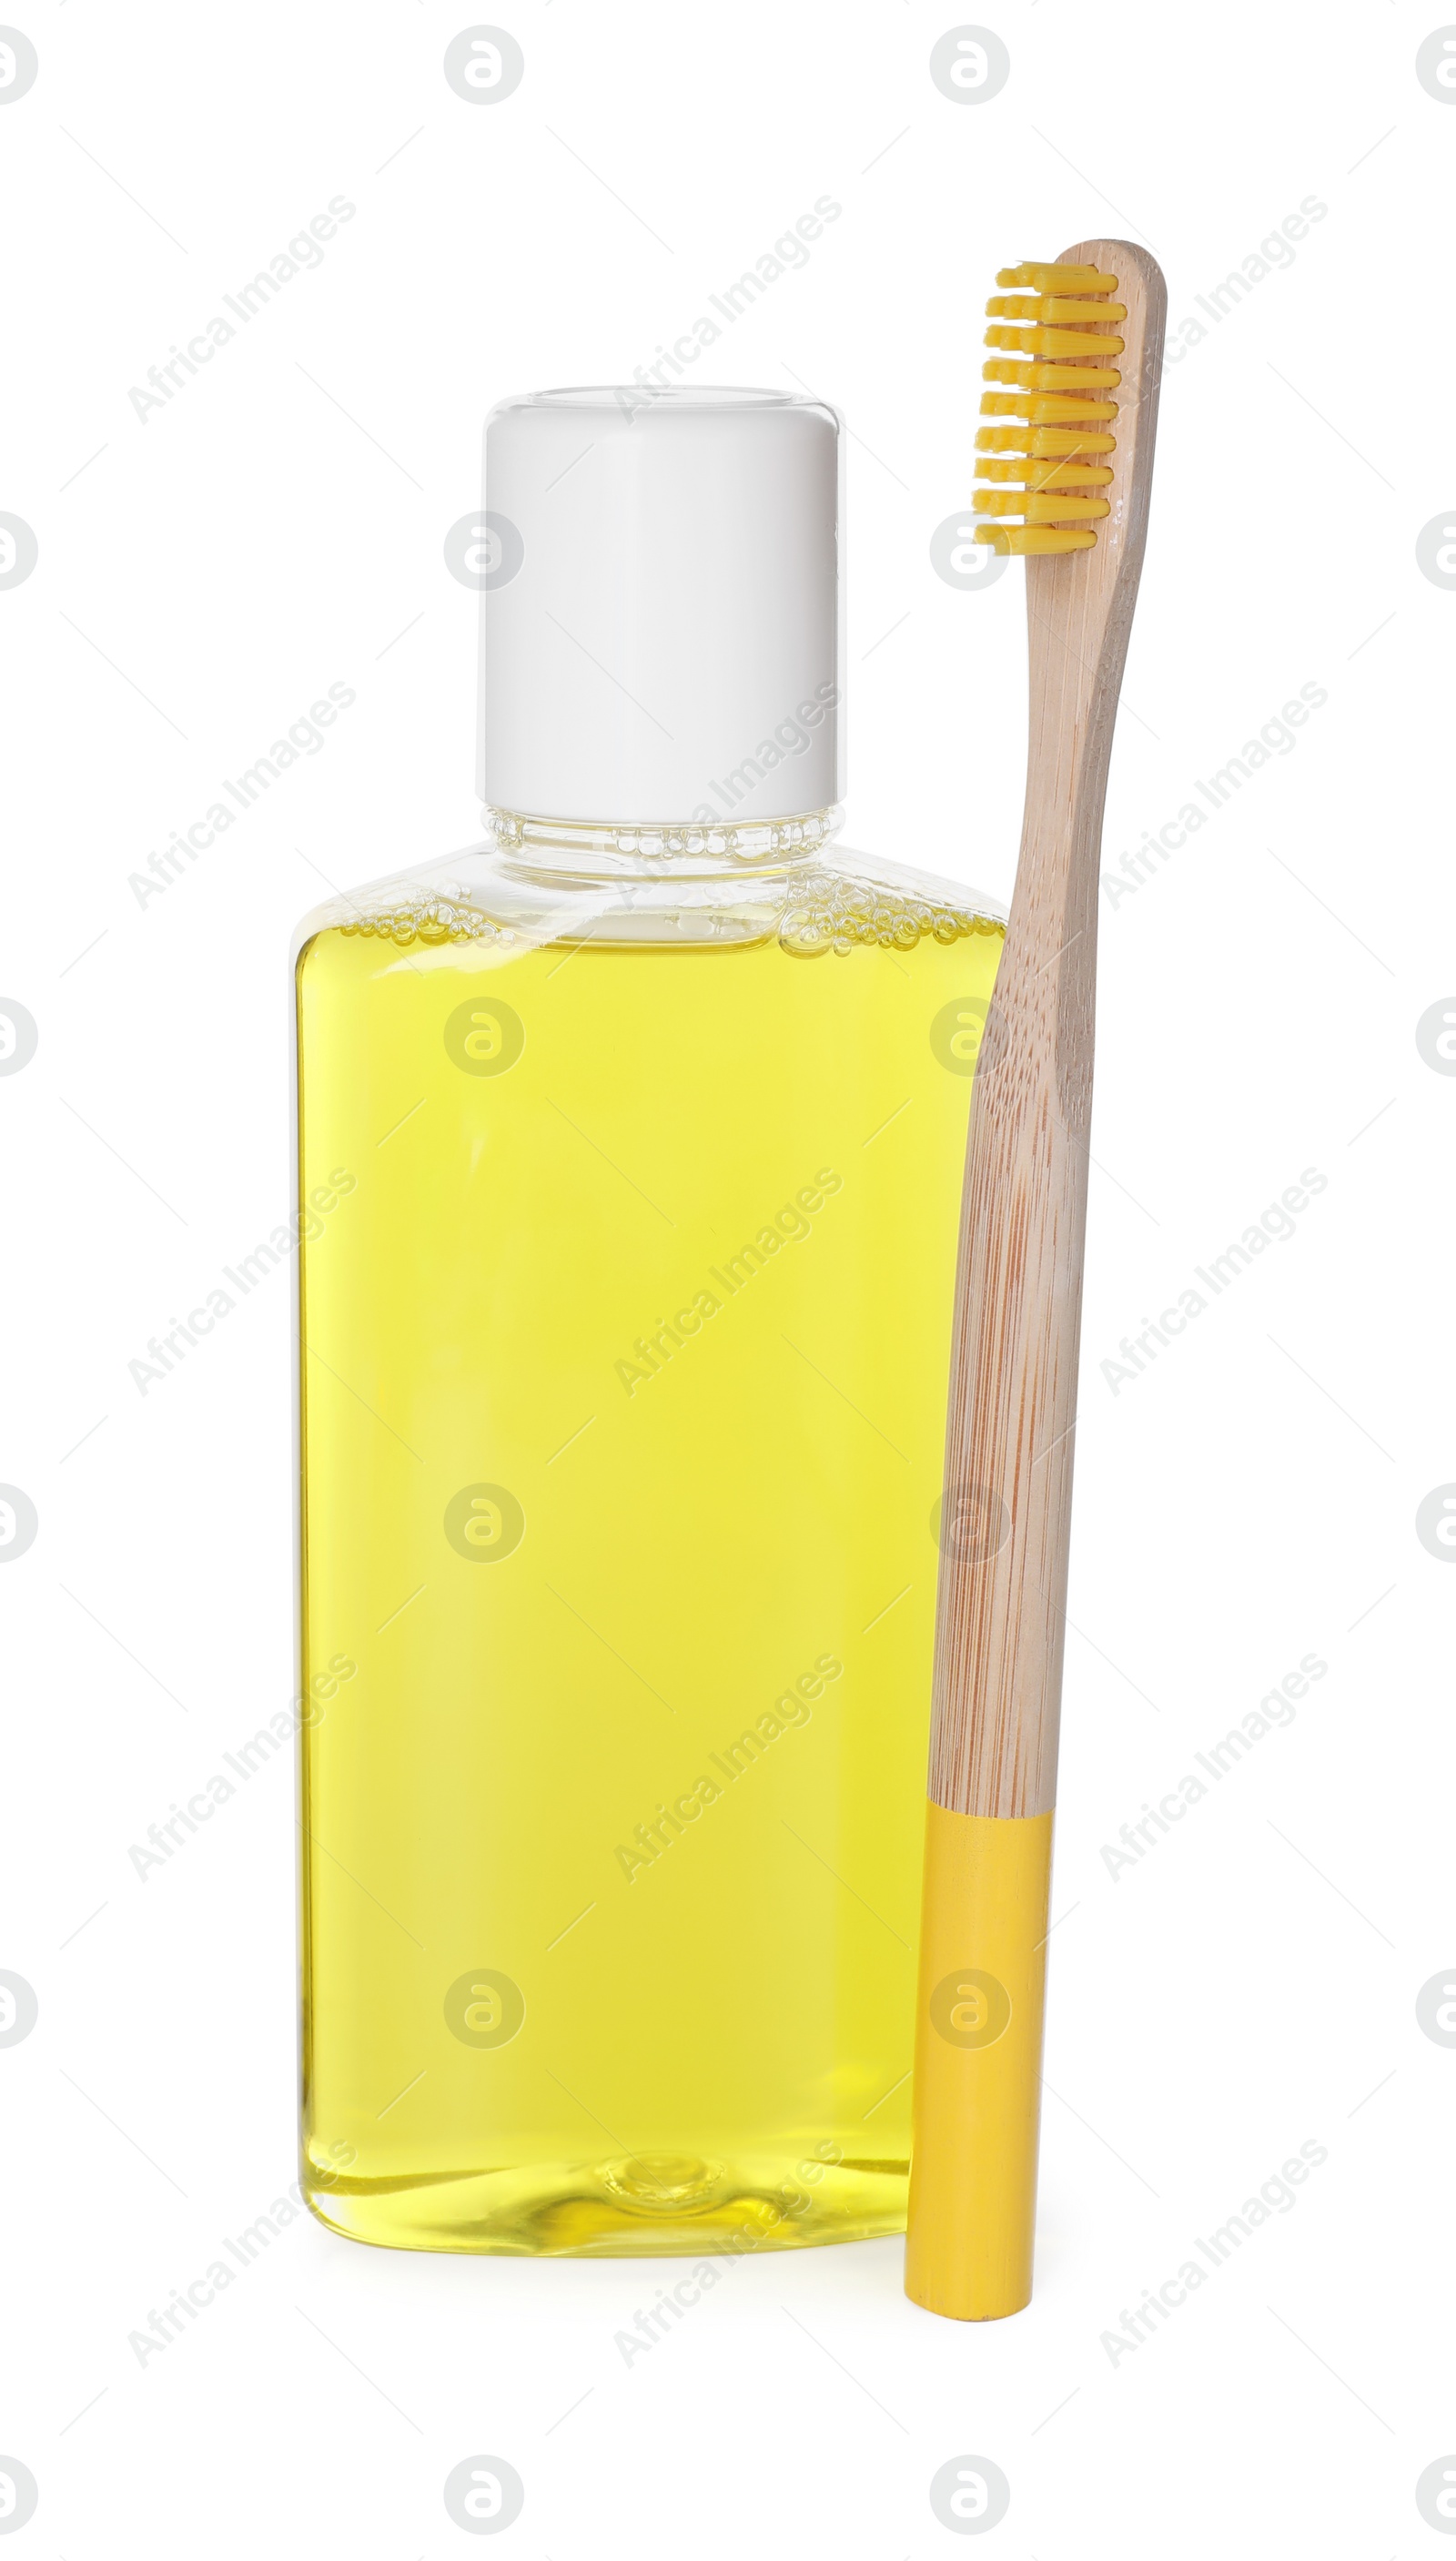 Photo of Bottle of mouthwash and toothbrush isolated on white